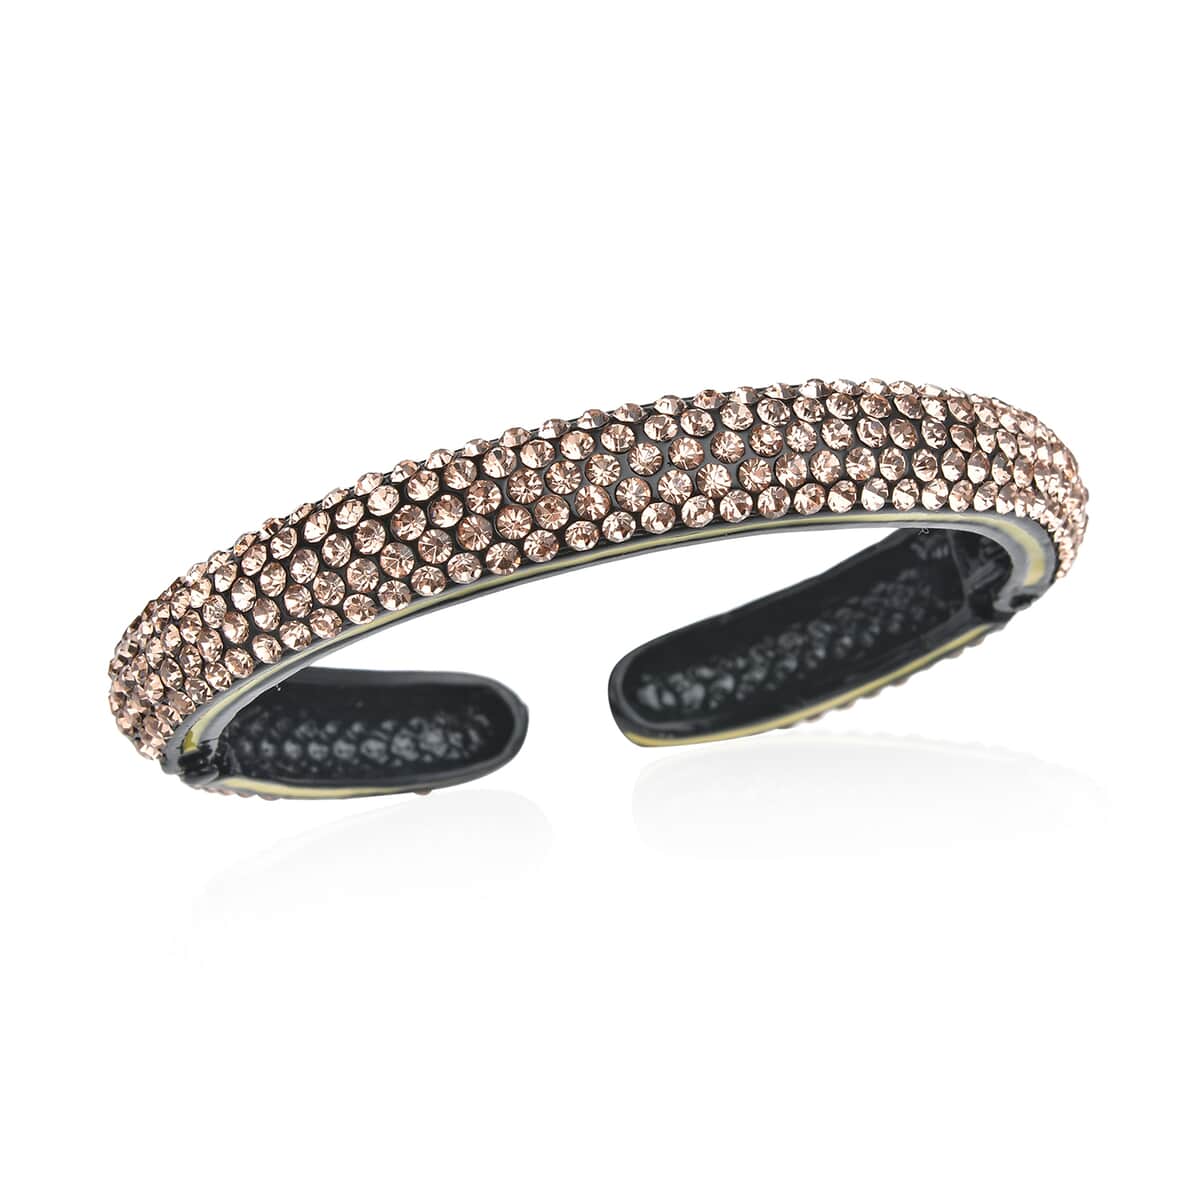 Champagne Austrian Crystal and Enameled Sparkling Cuff Bracelet in Black Silvertone (6.75 in) image number 0